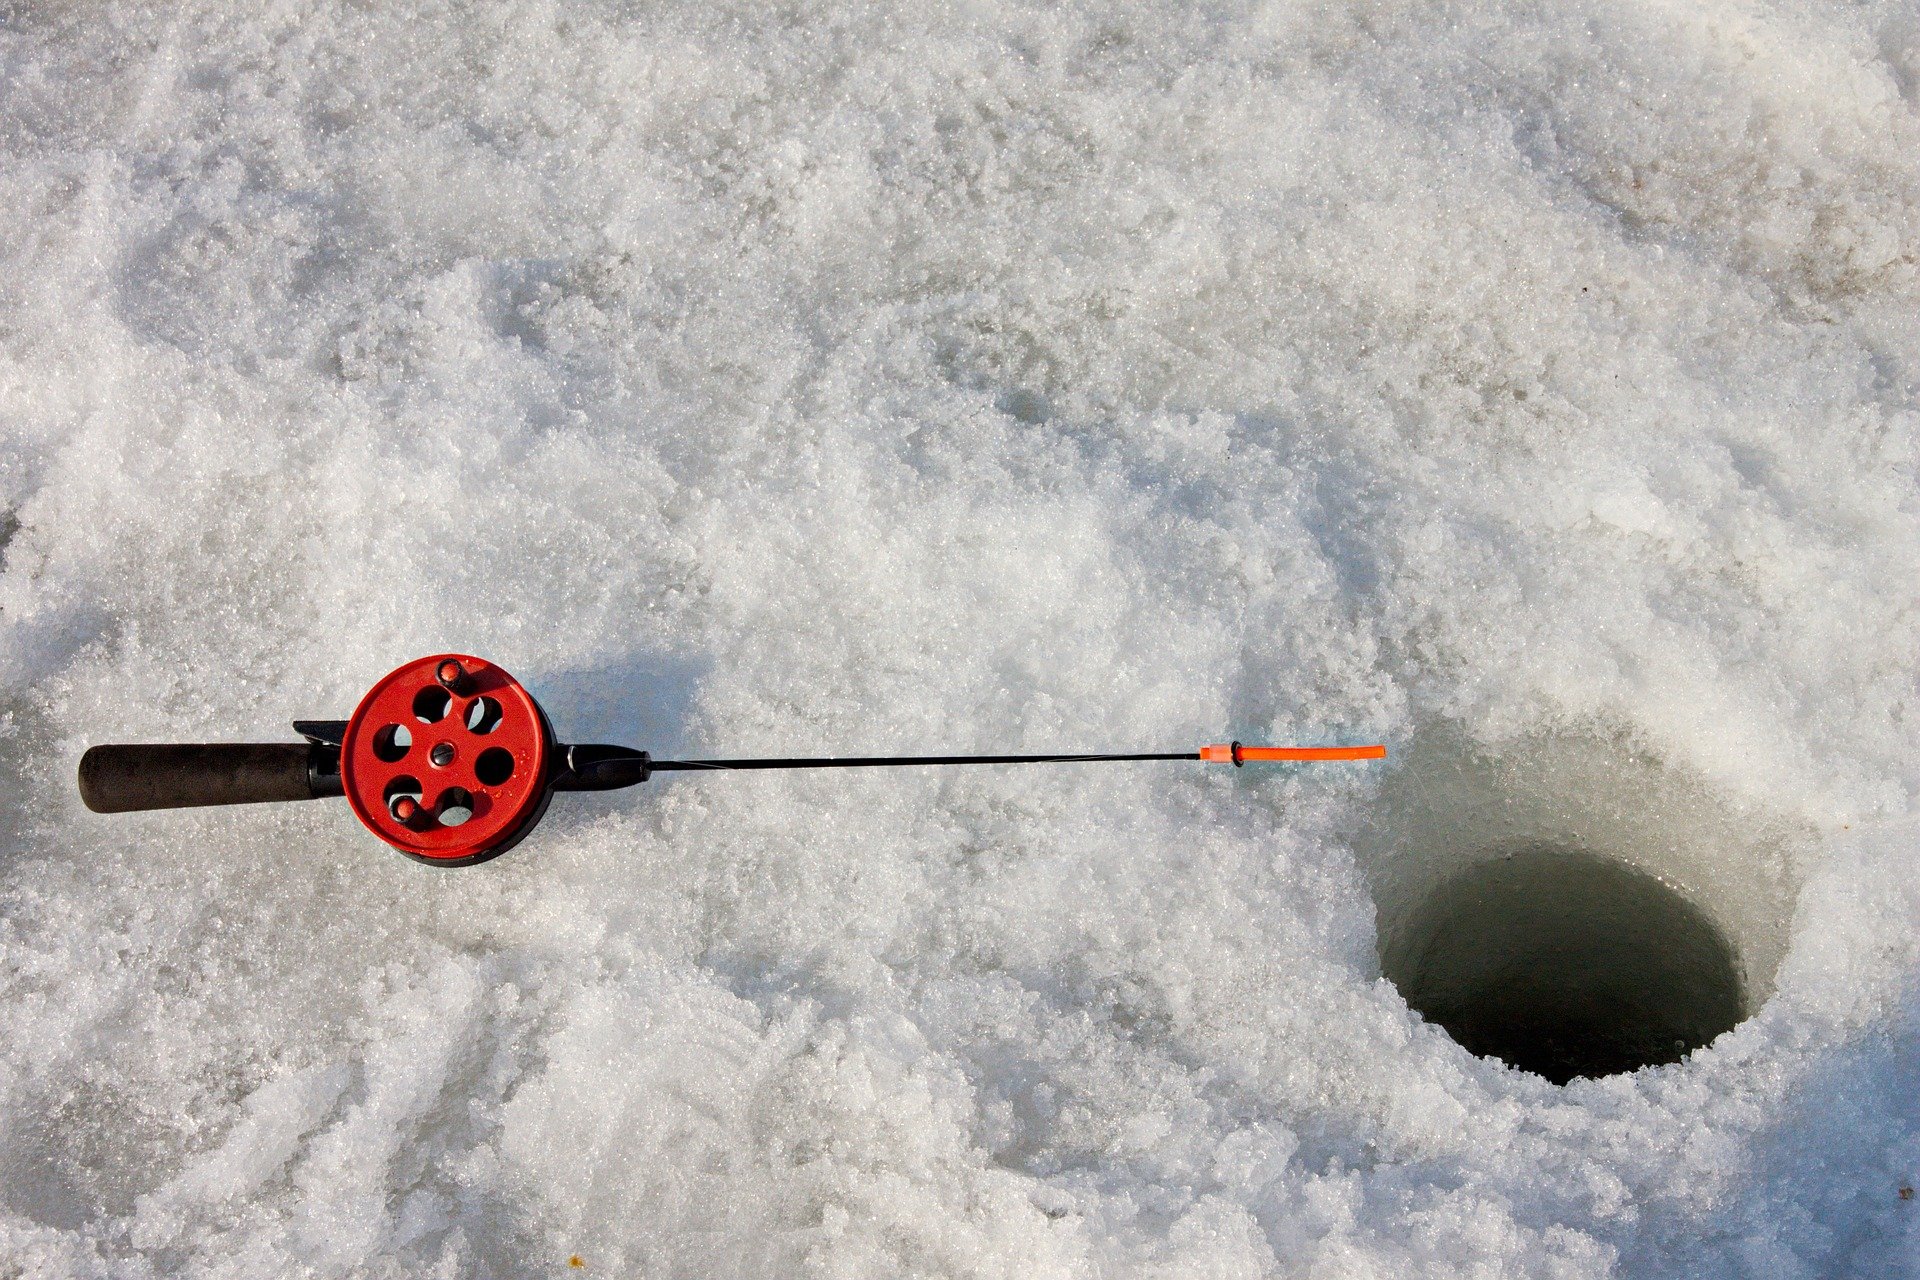 A hole in the ice with a fishing rod next to it. | Source: Pixabay.